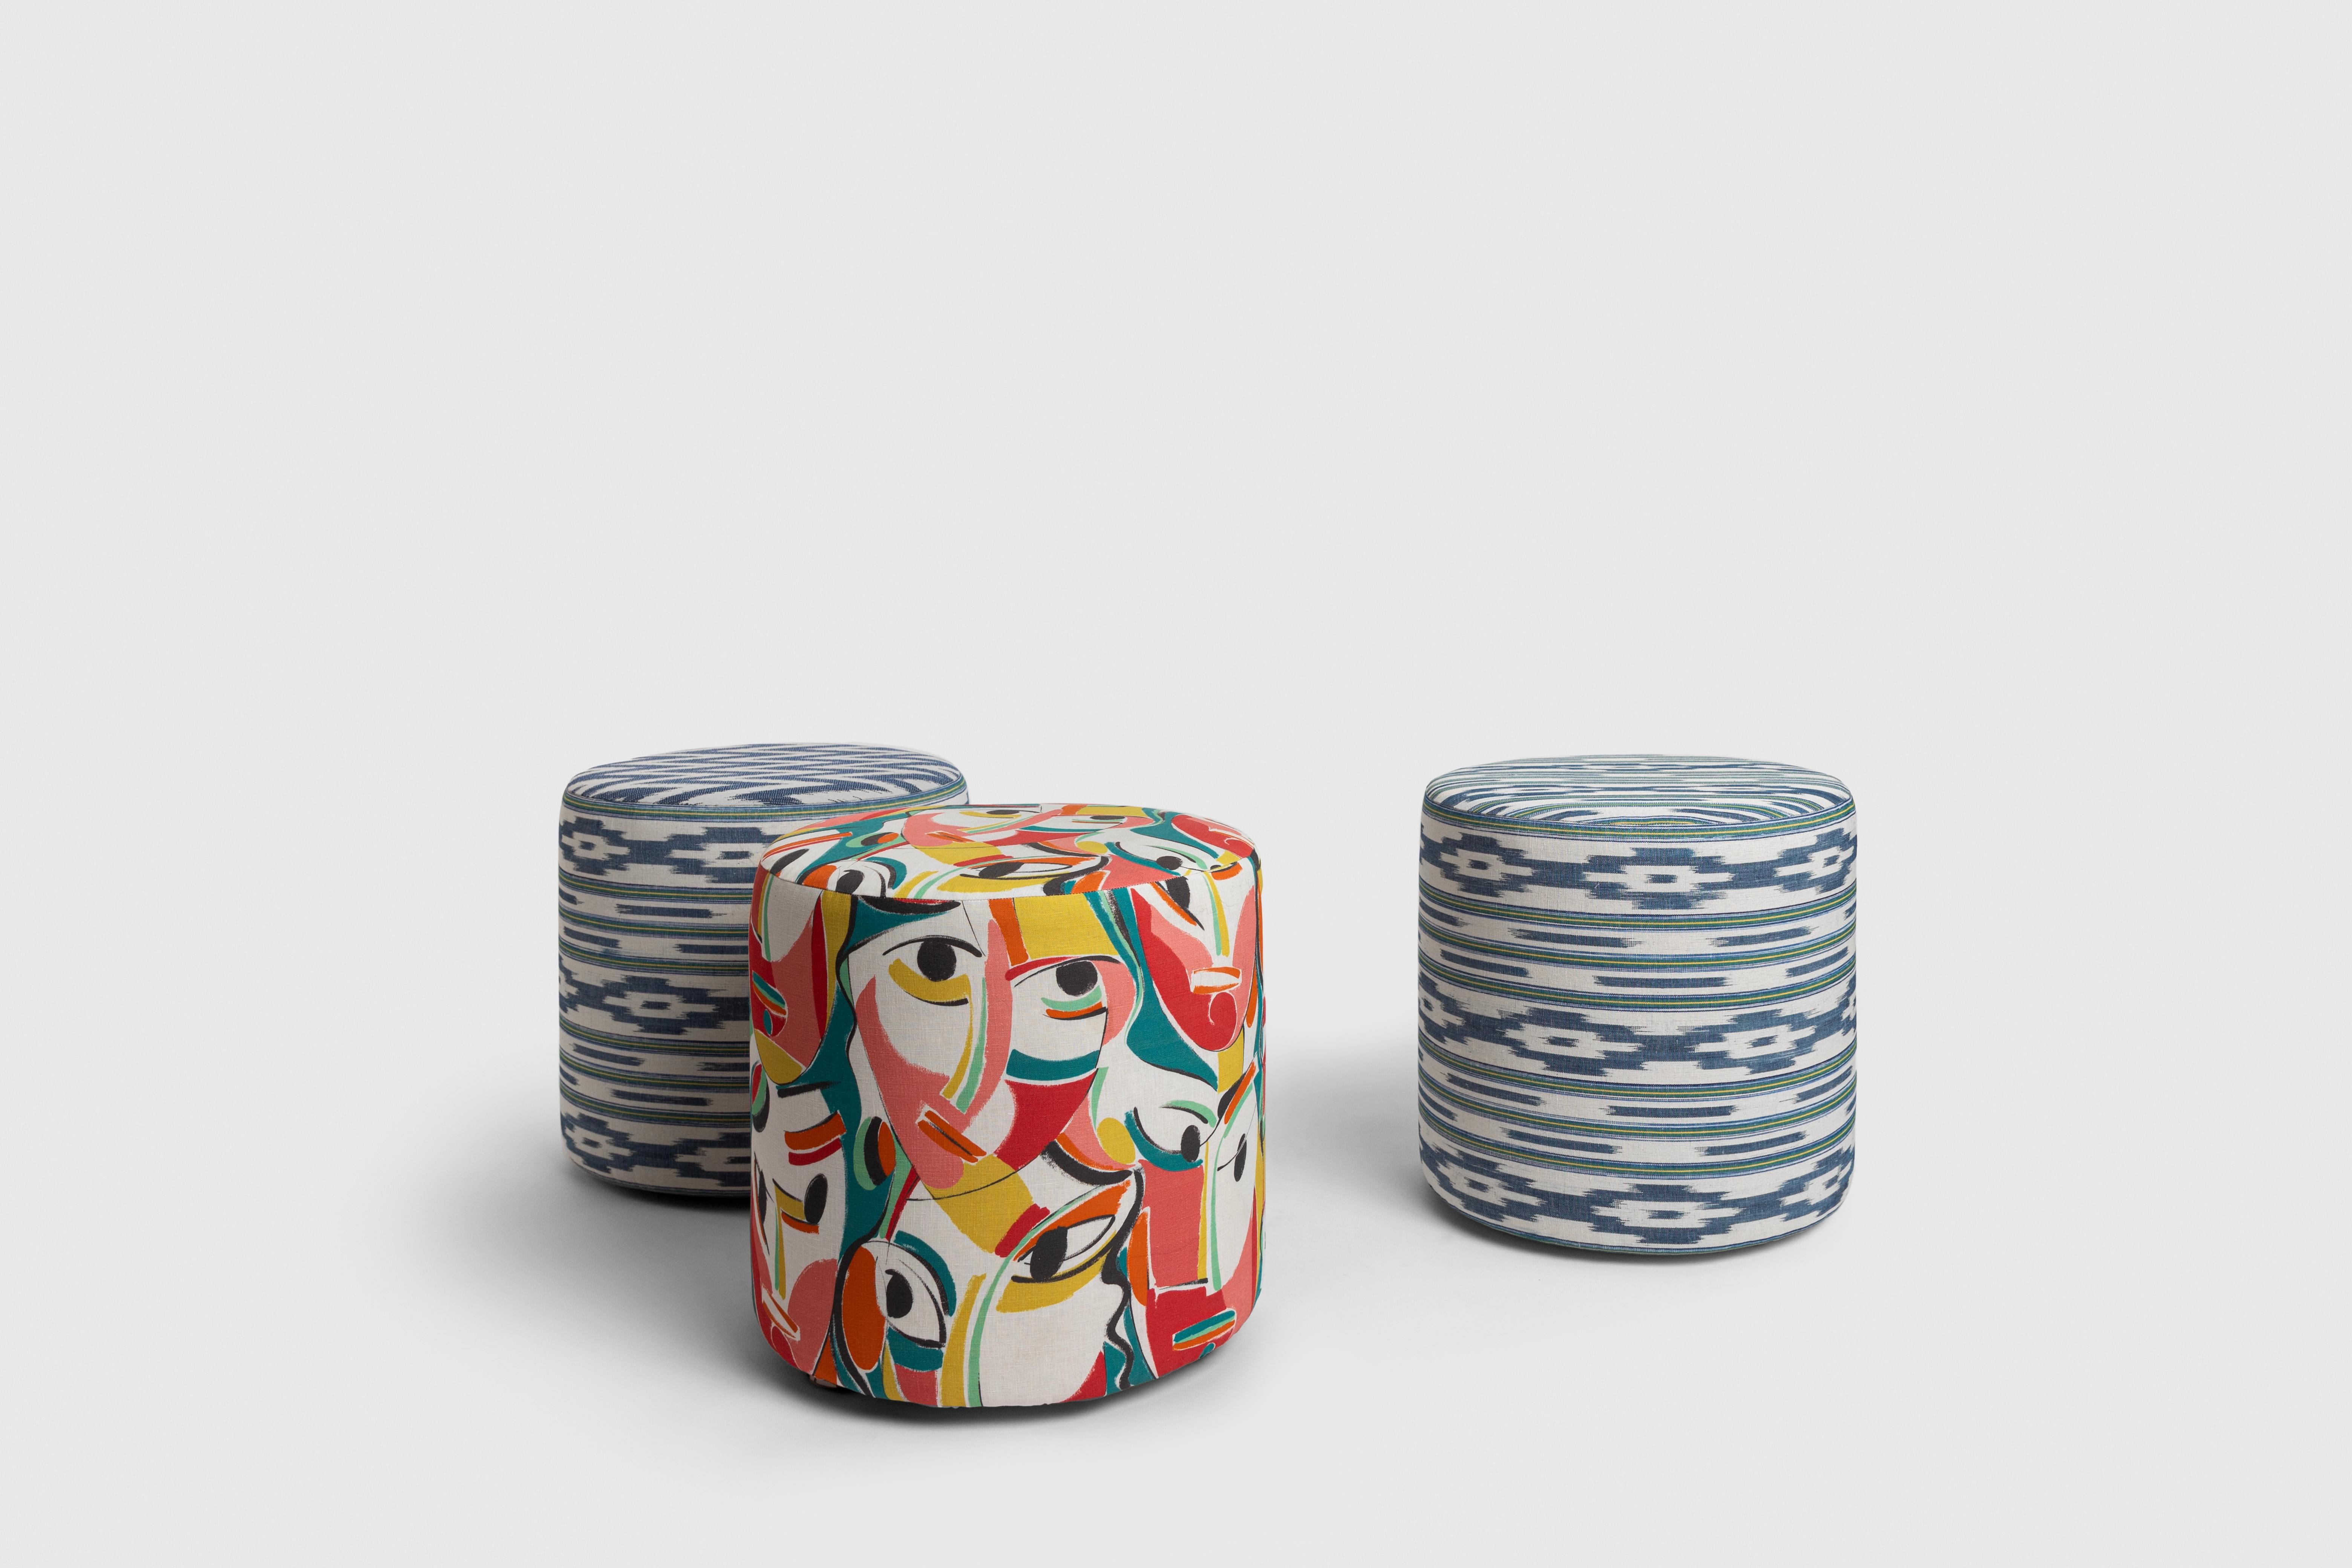 Beautiful round ottoman seat handmade in Mexico City and available in different custom fabrics.
This seat was designed to bring a bold element to spaces lacking a pop of color, while keeping it looking and feeling cozy. It can be added to a room in